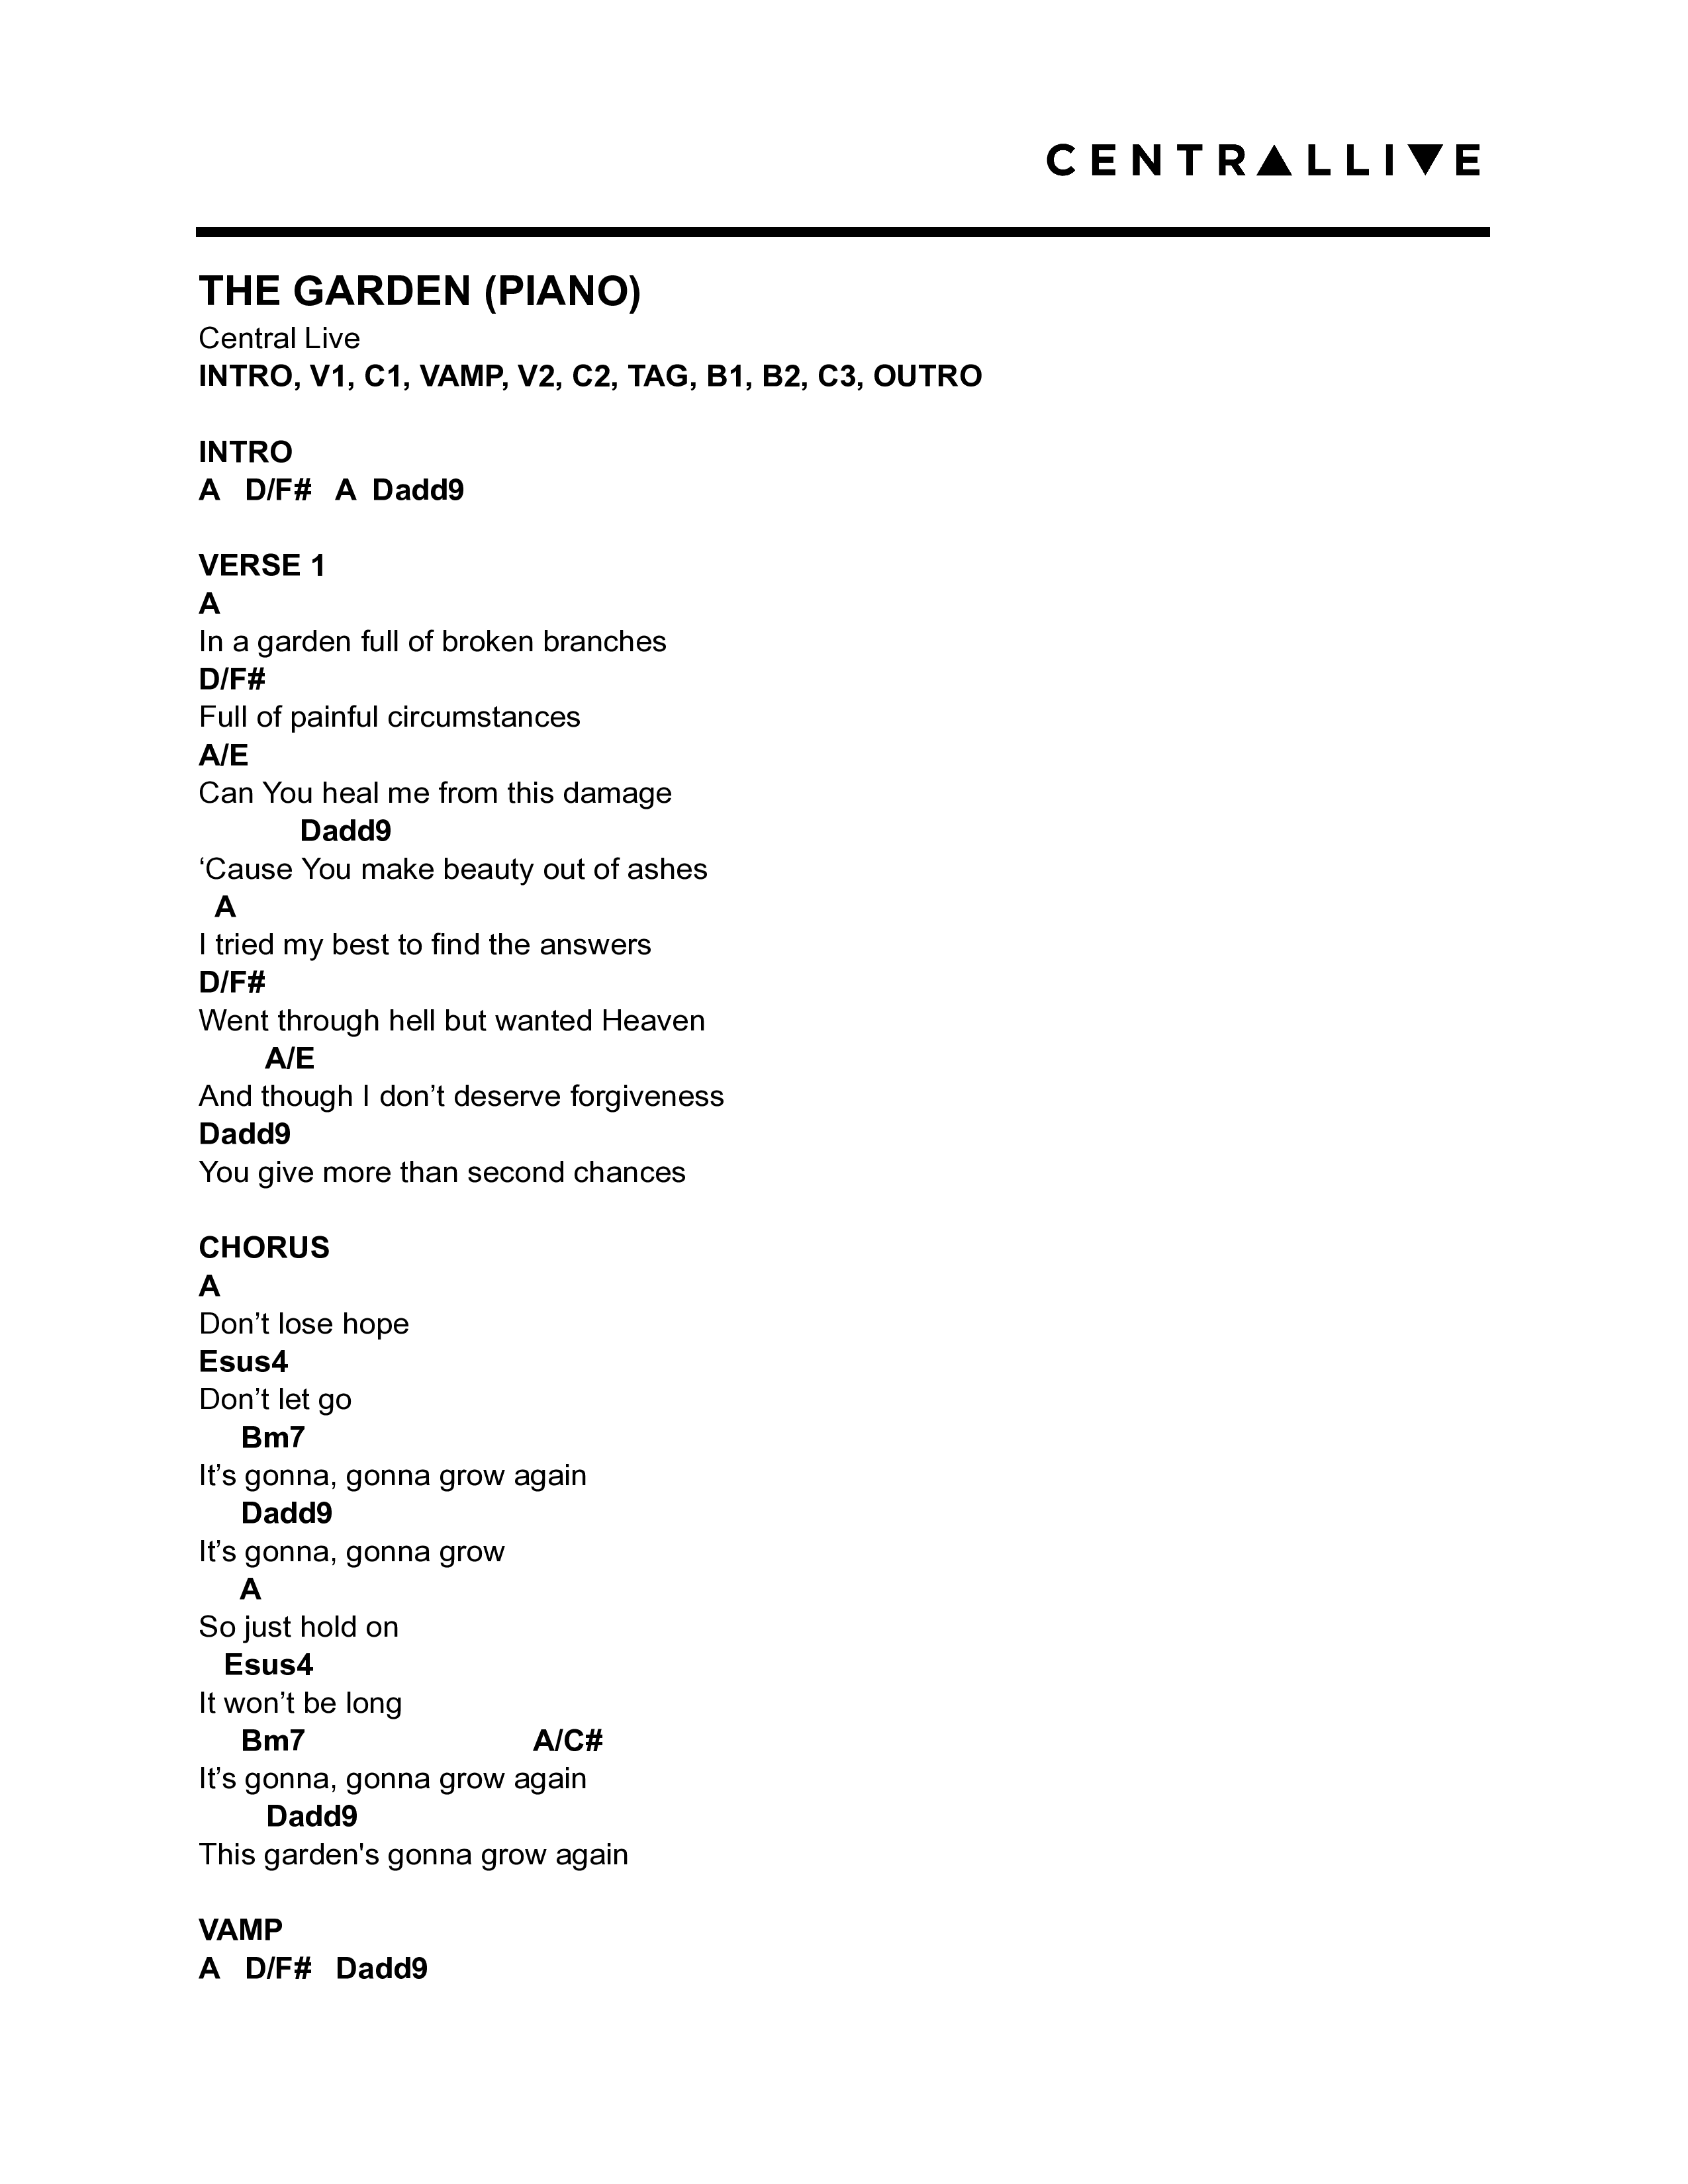 The Garden (Piano) Chord Chart (Central Live)